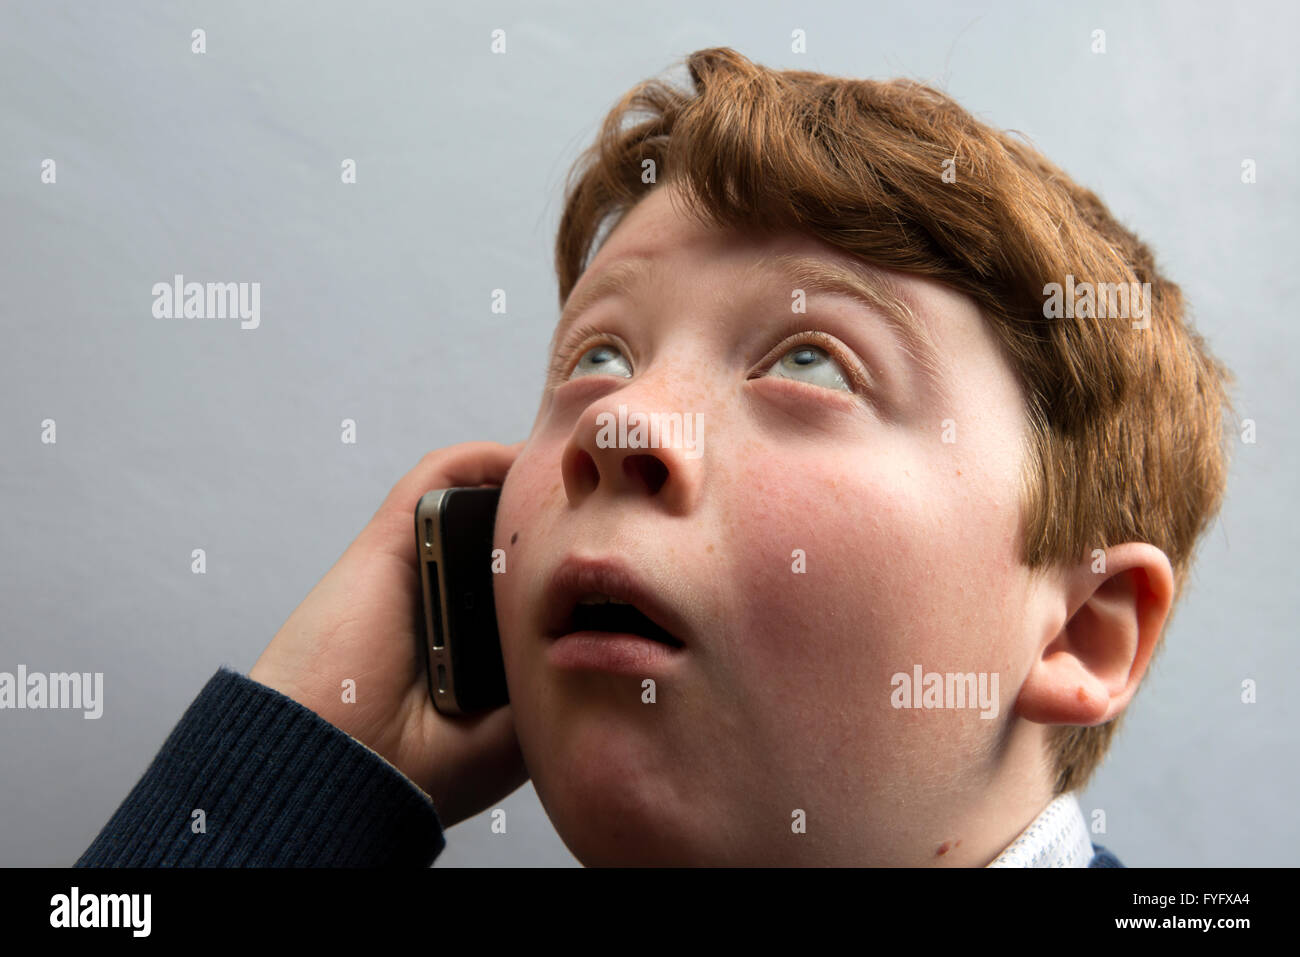 Young boy using mobile phone Stock Photo